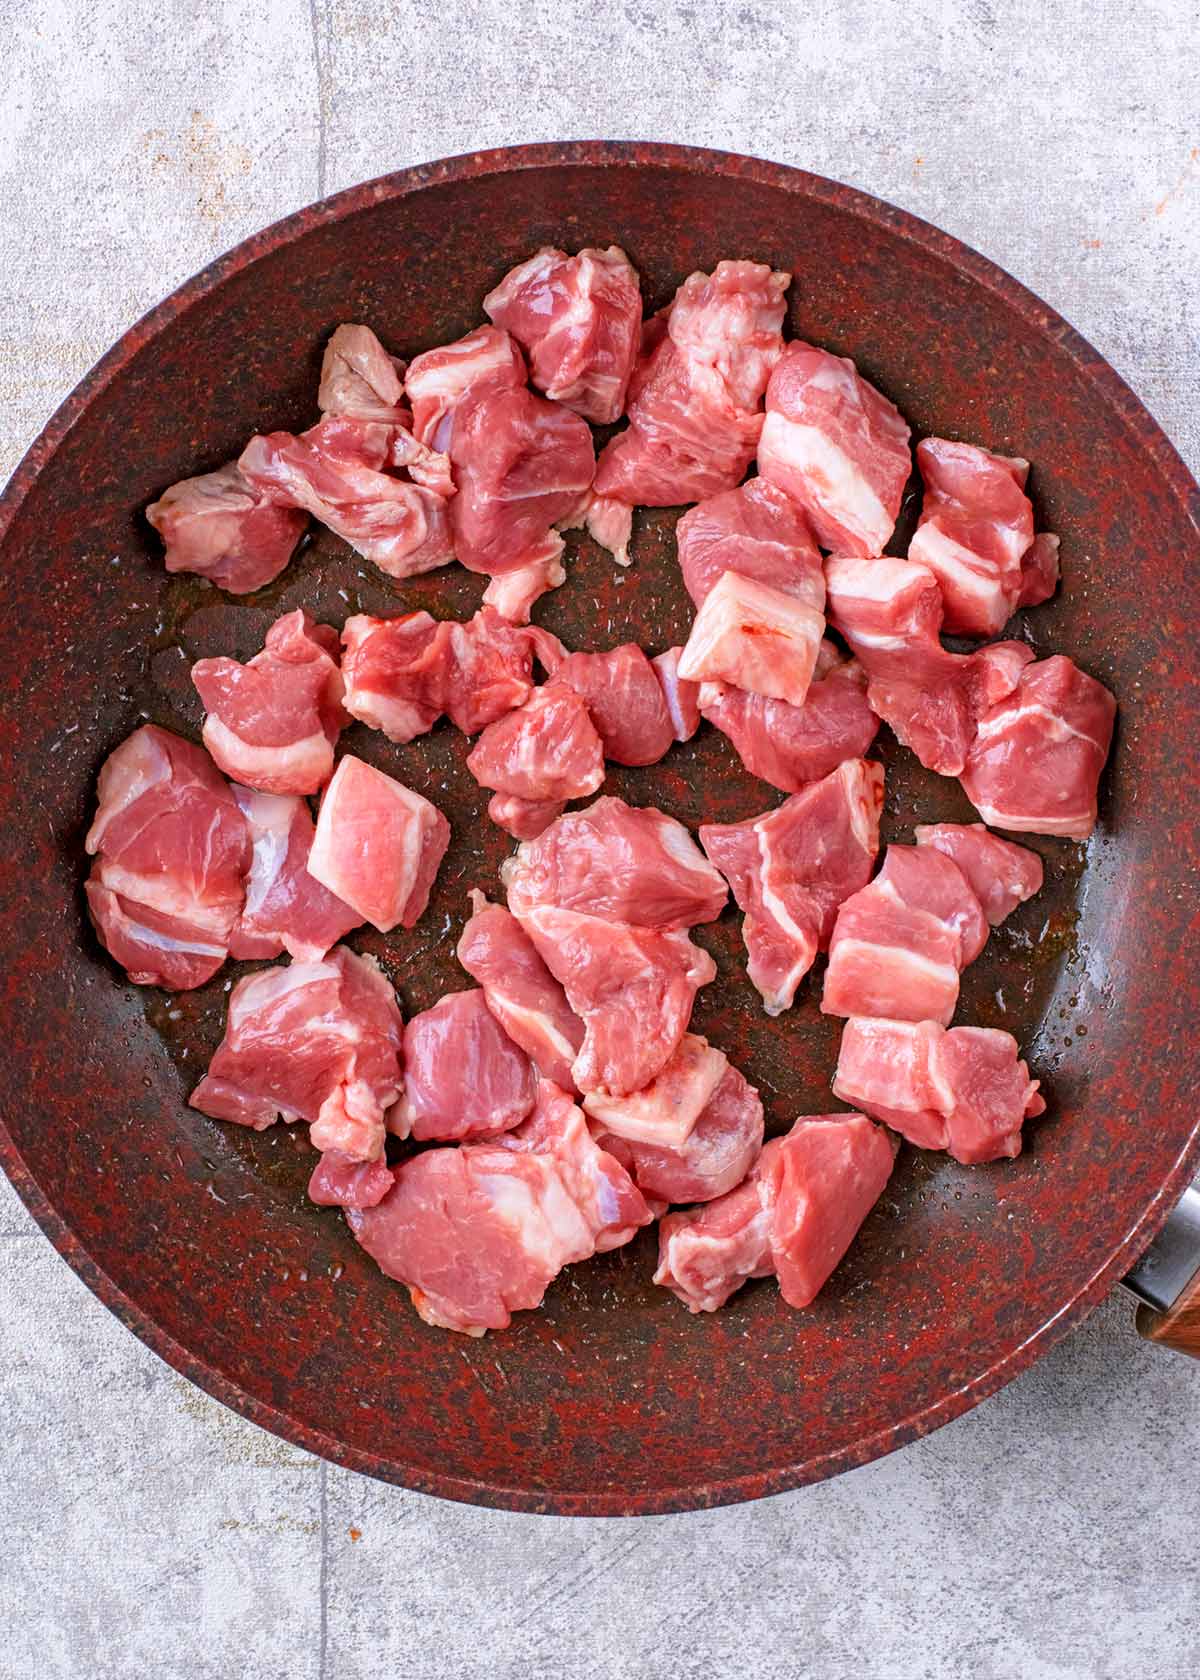 Chunks of lamb cooking in a frying pan.